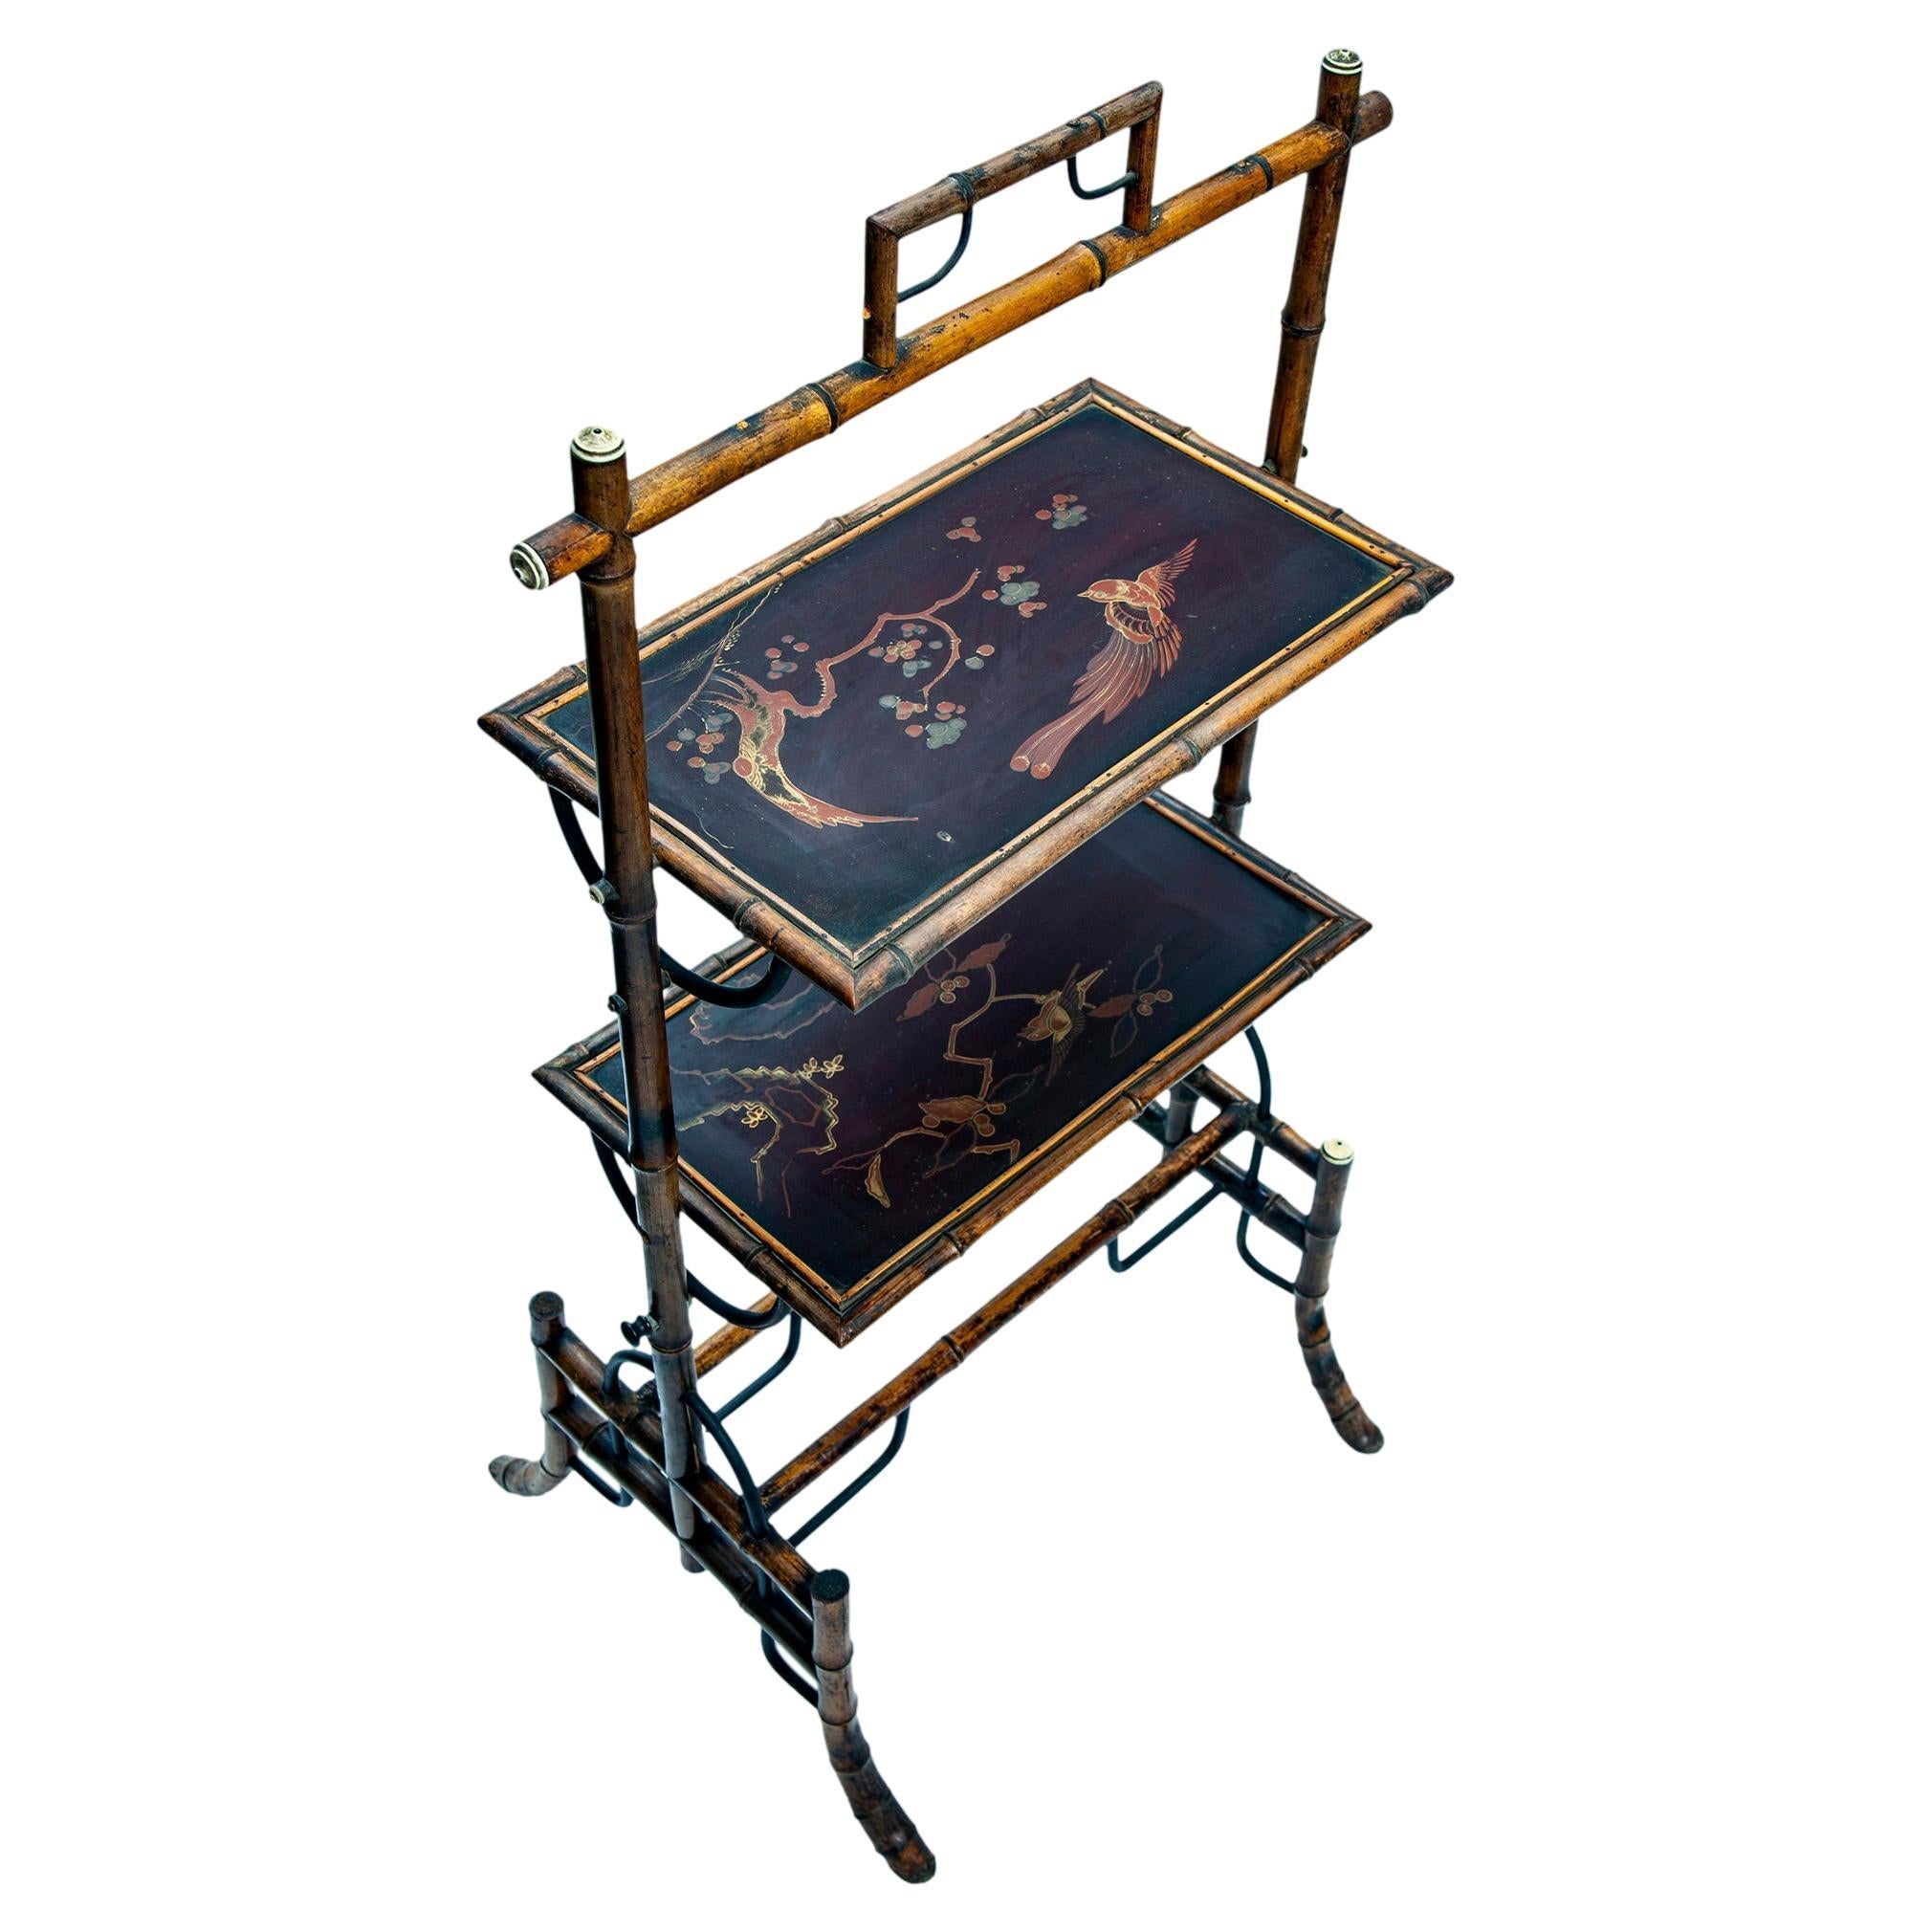 Asian bamboo tray table with handpainted with birds & branches. A handle on the top for moving around easily. The painted motif is visible on both trays.
There are two shelves to use as a side table or perhaps a drink or for hors d’oeuvres tray. The